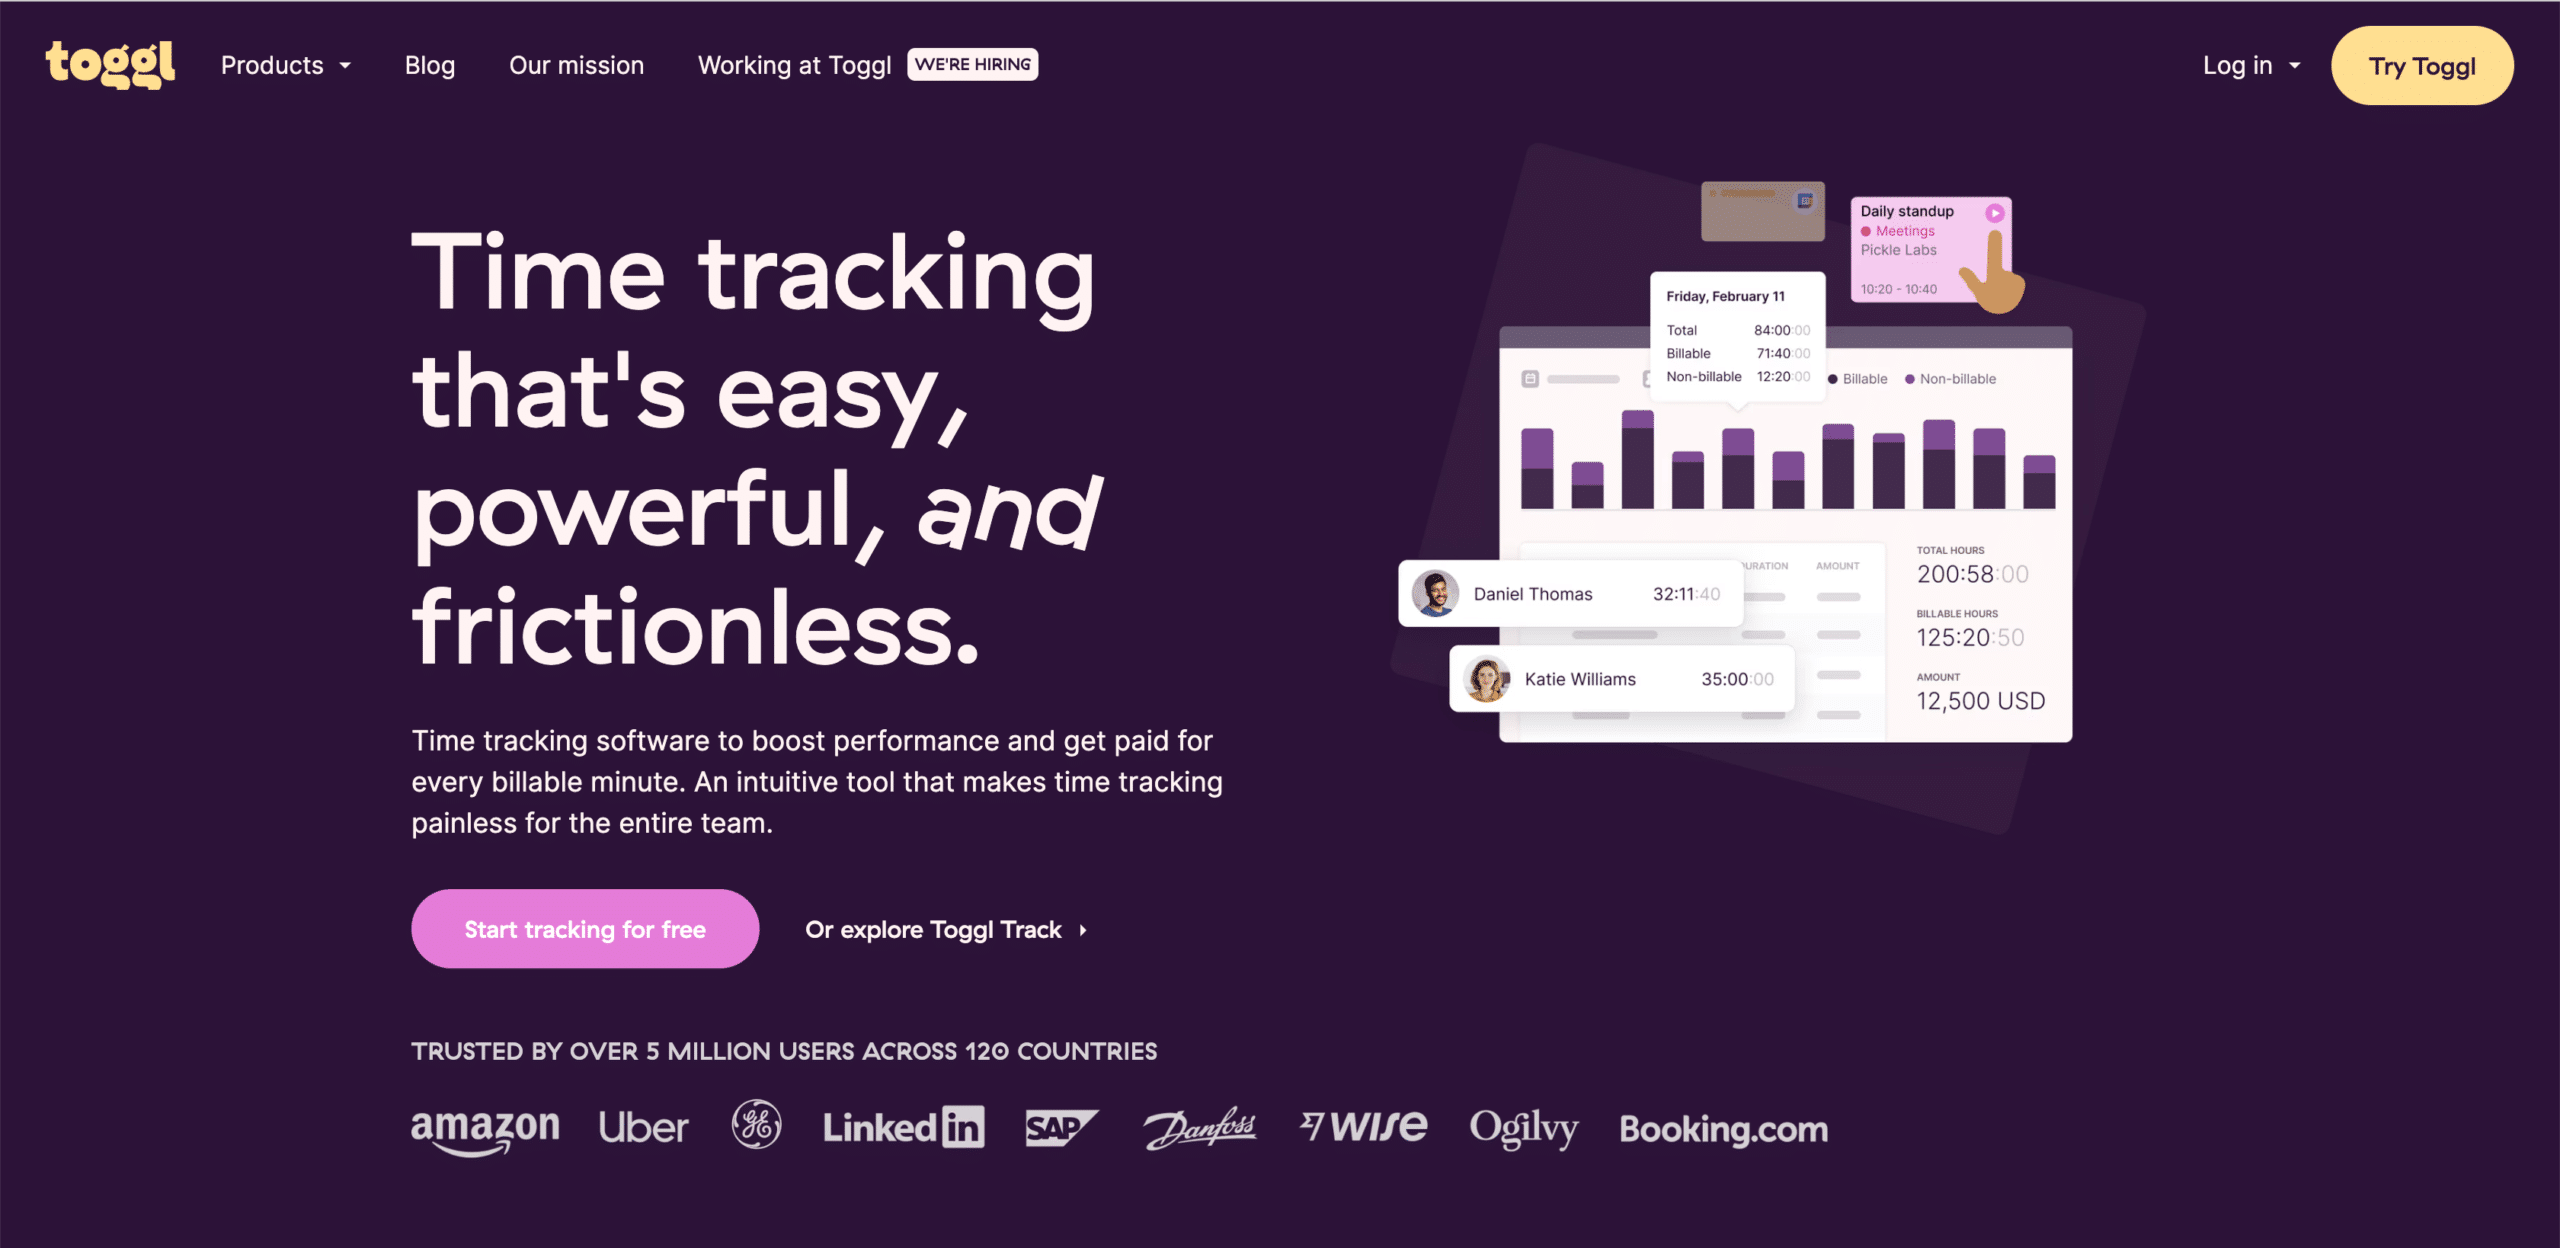 Toggl Track demonstrates many of the SaaS web design best practices